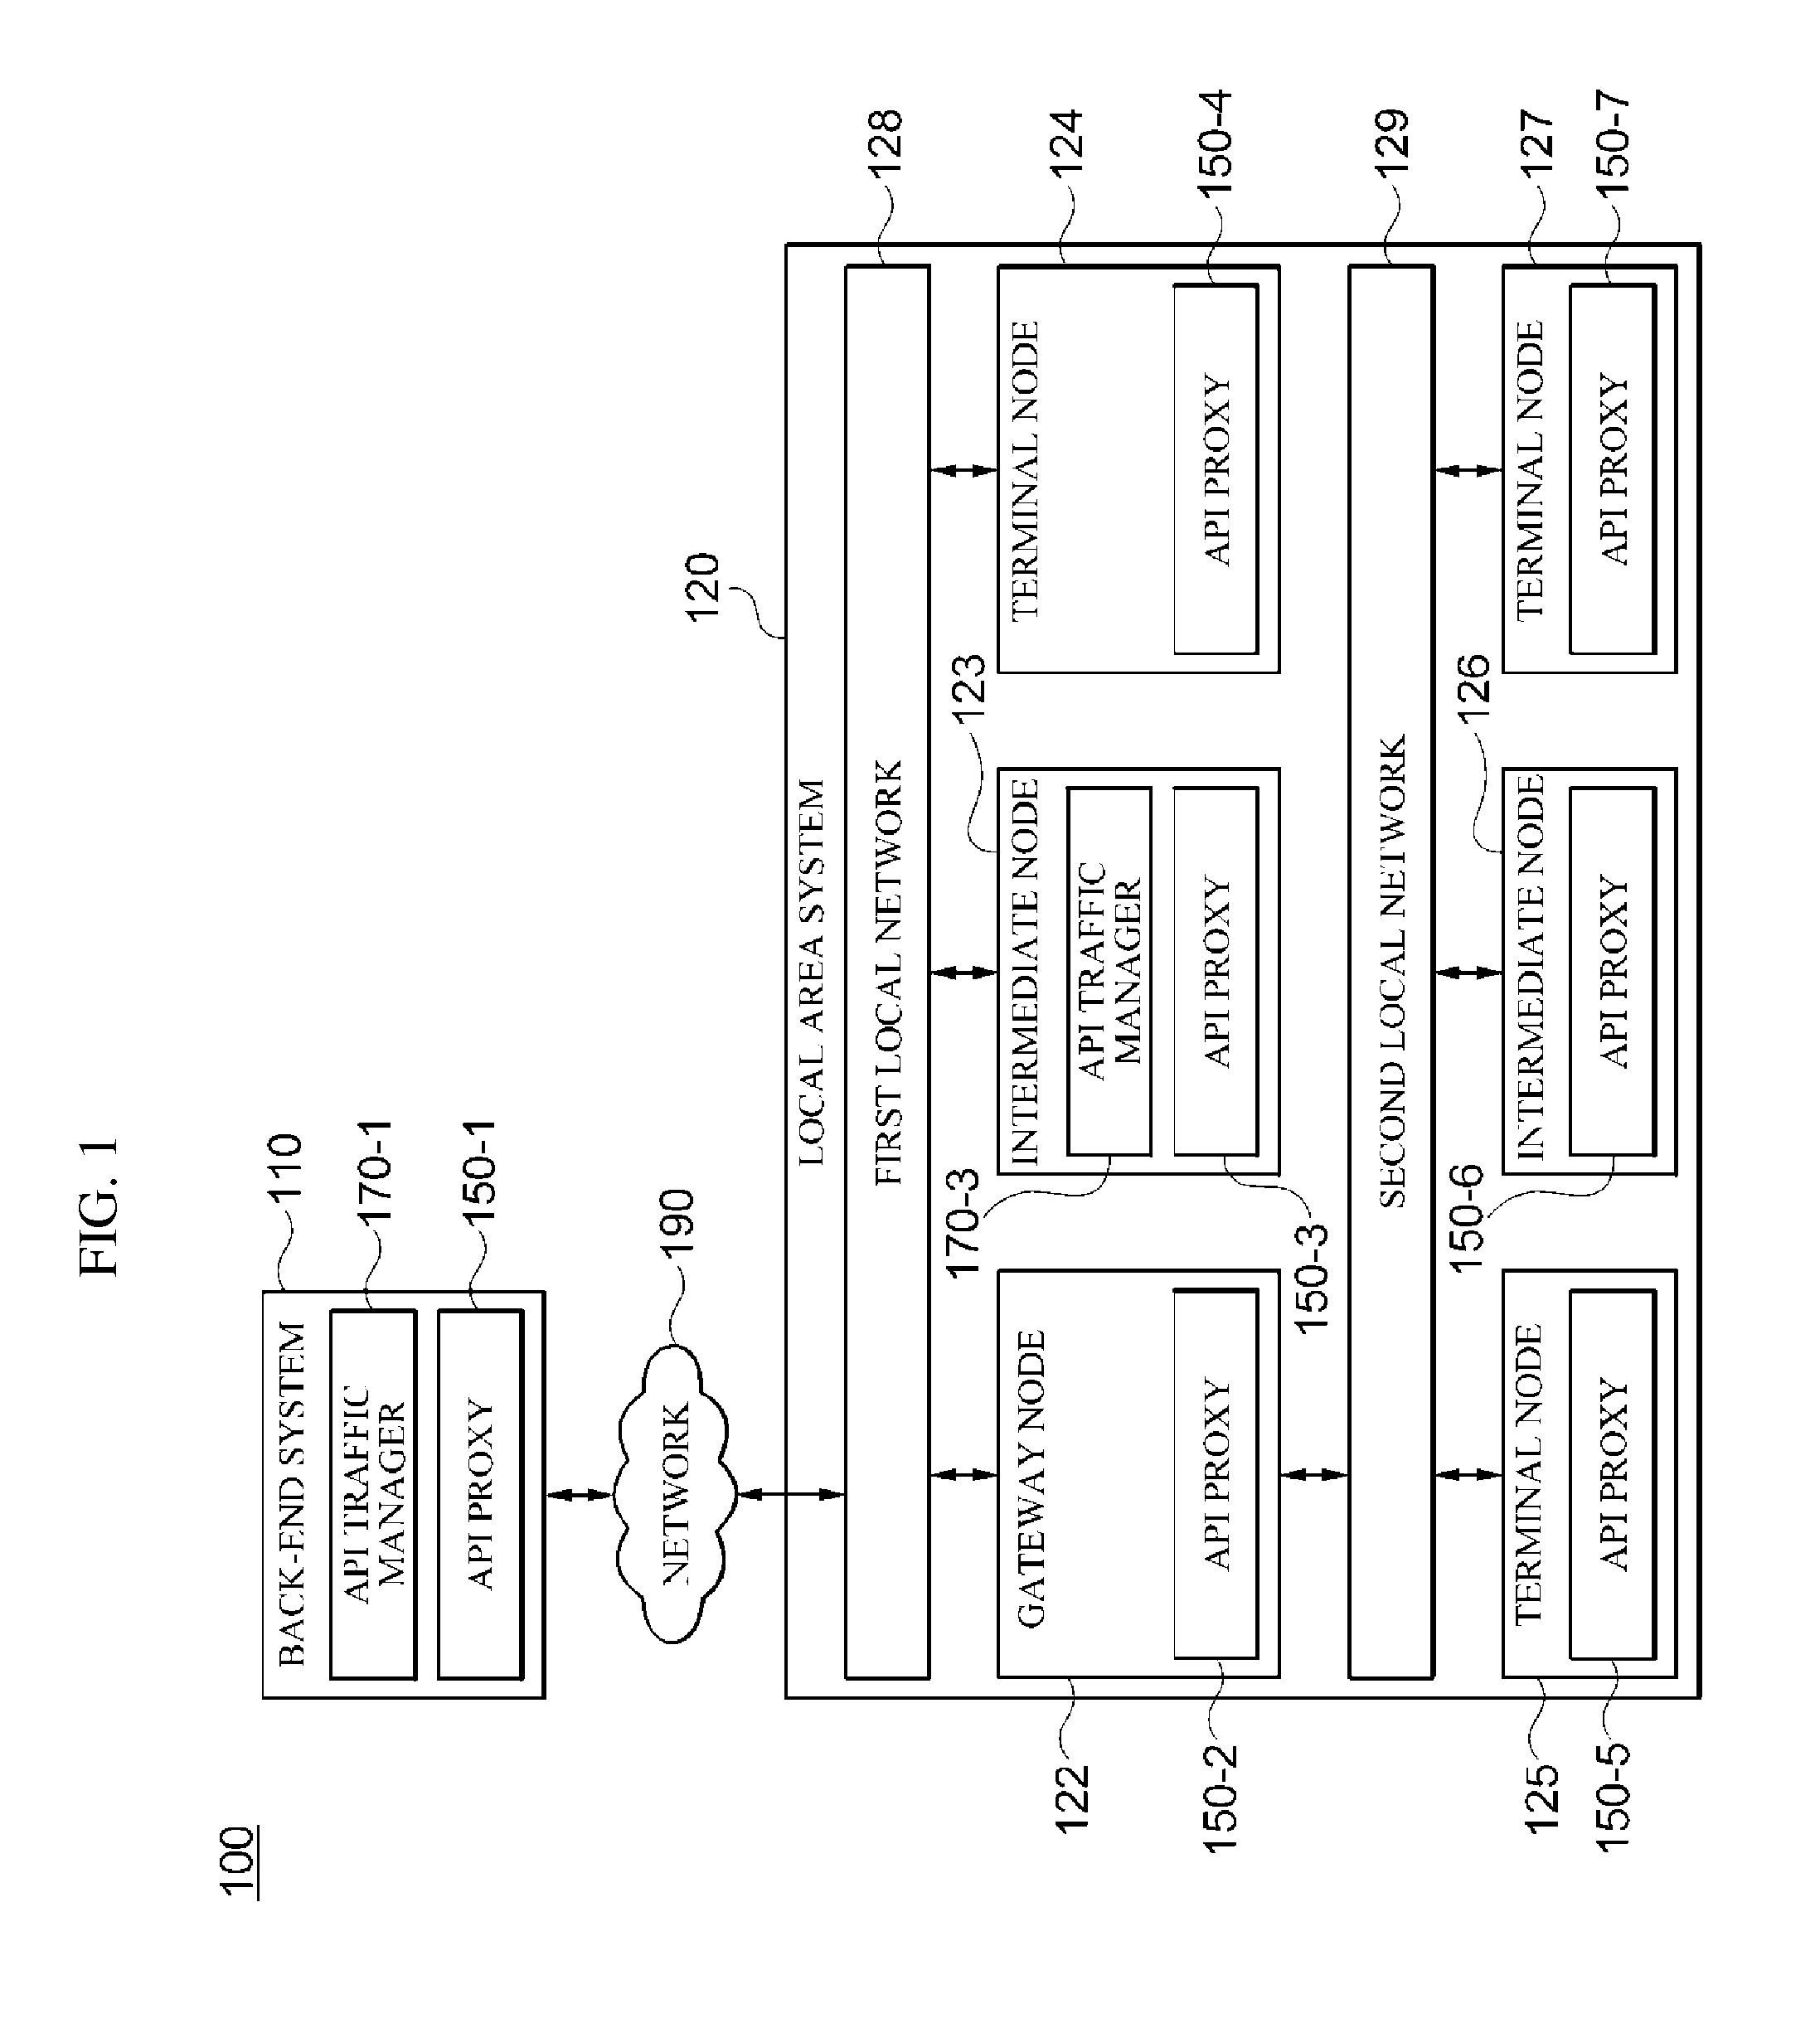 Distributed api proxy system and apparatus and method for managing traffic in such system